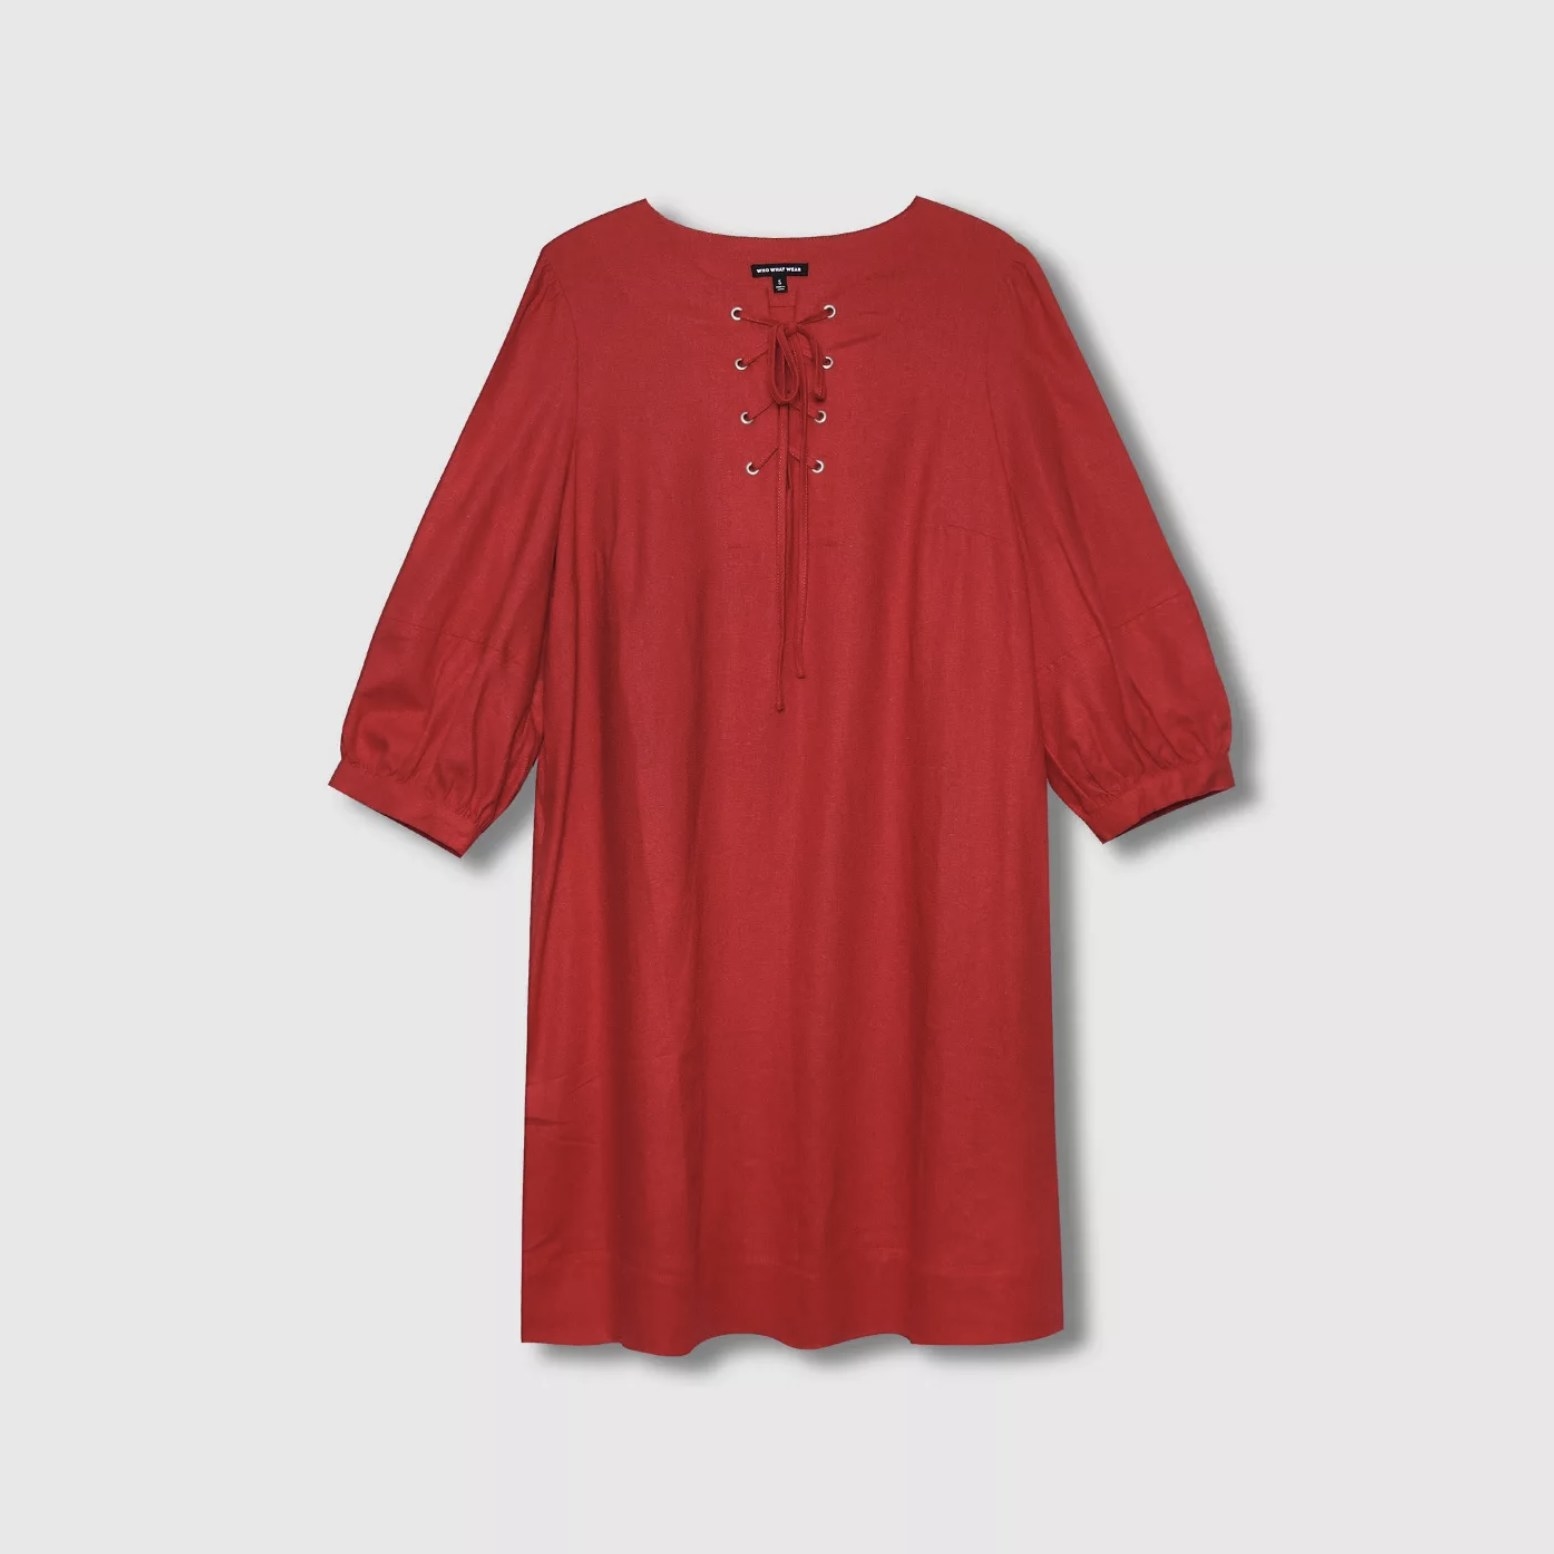 An image of a red dress with three-quarter sleeves and a lace-up design on the neckline